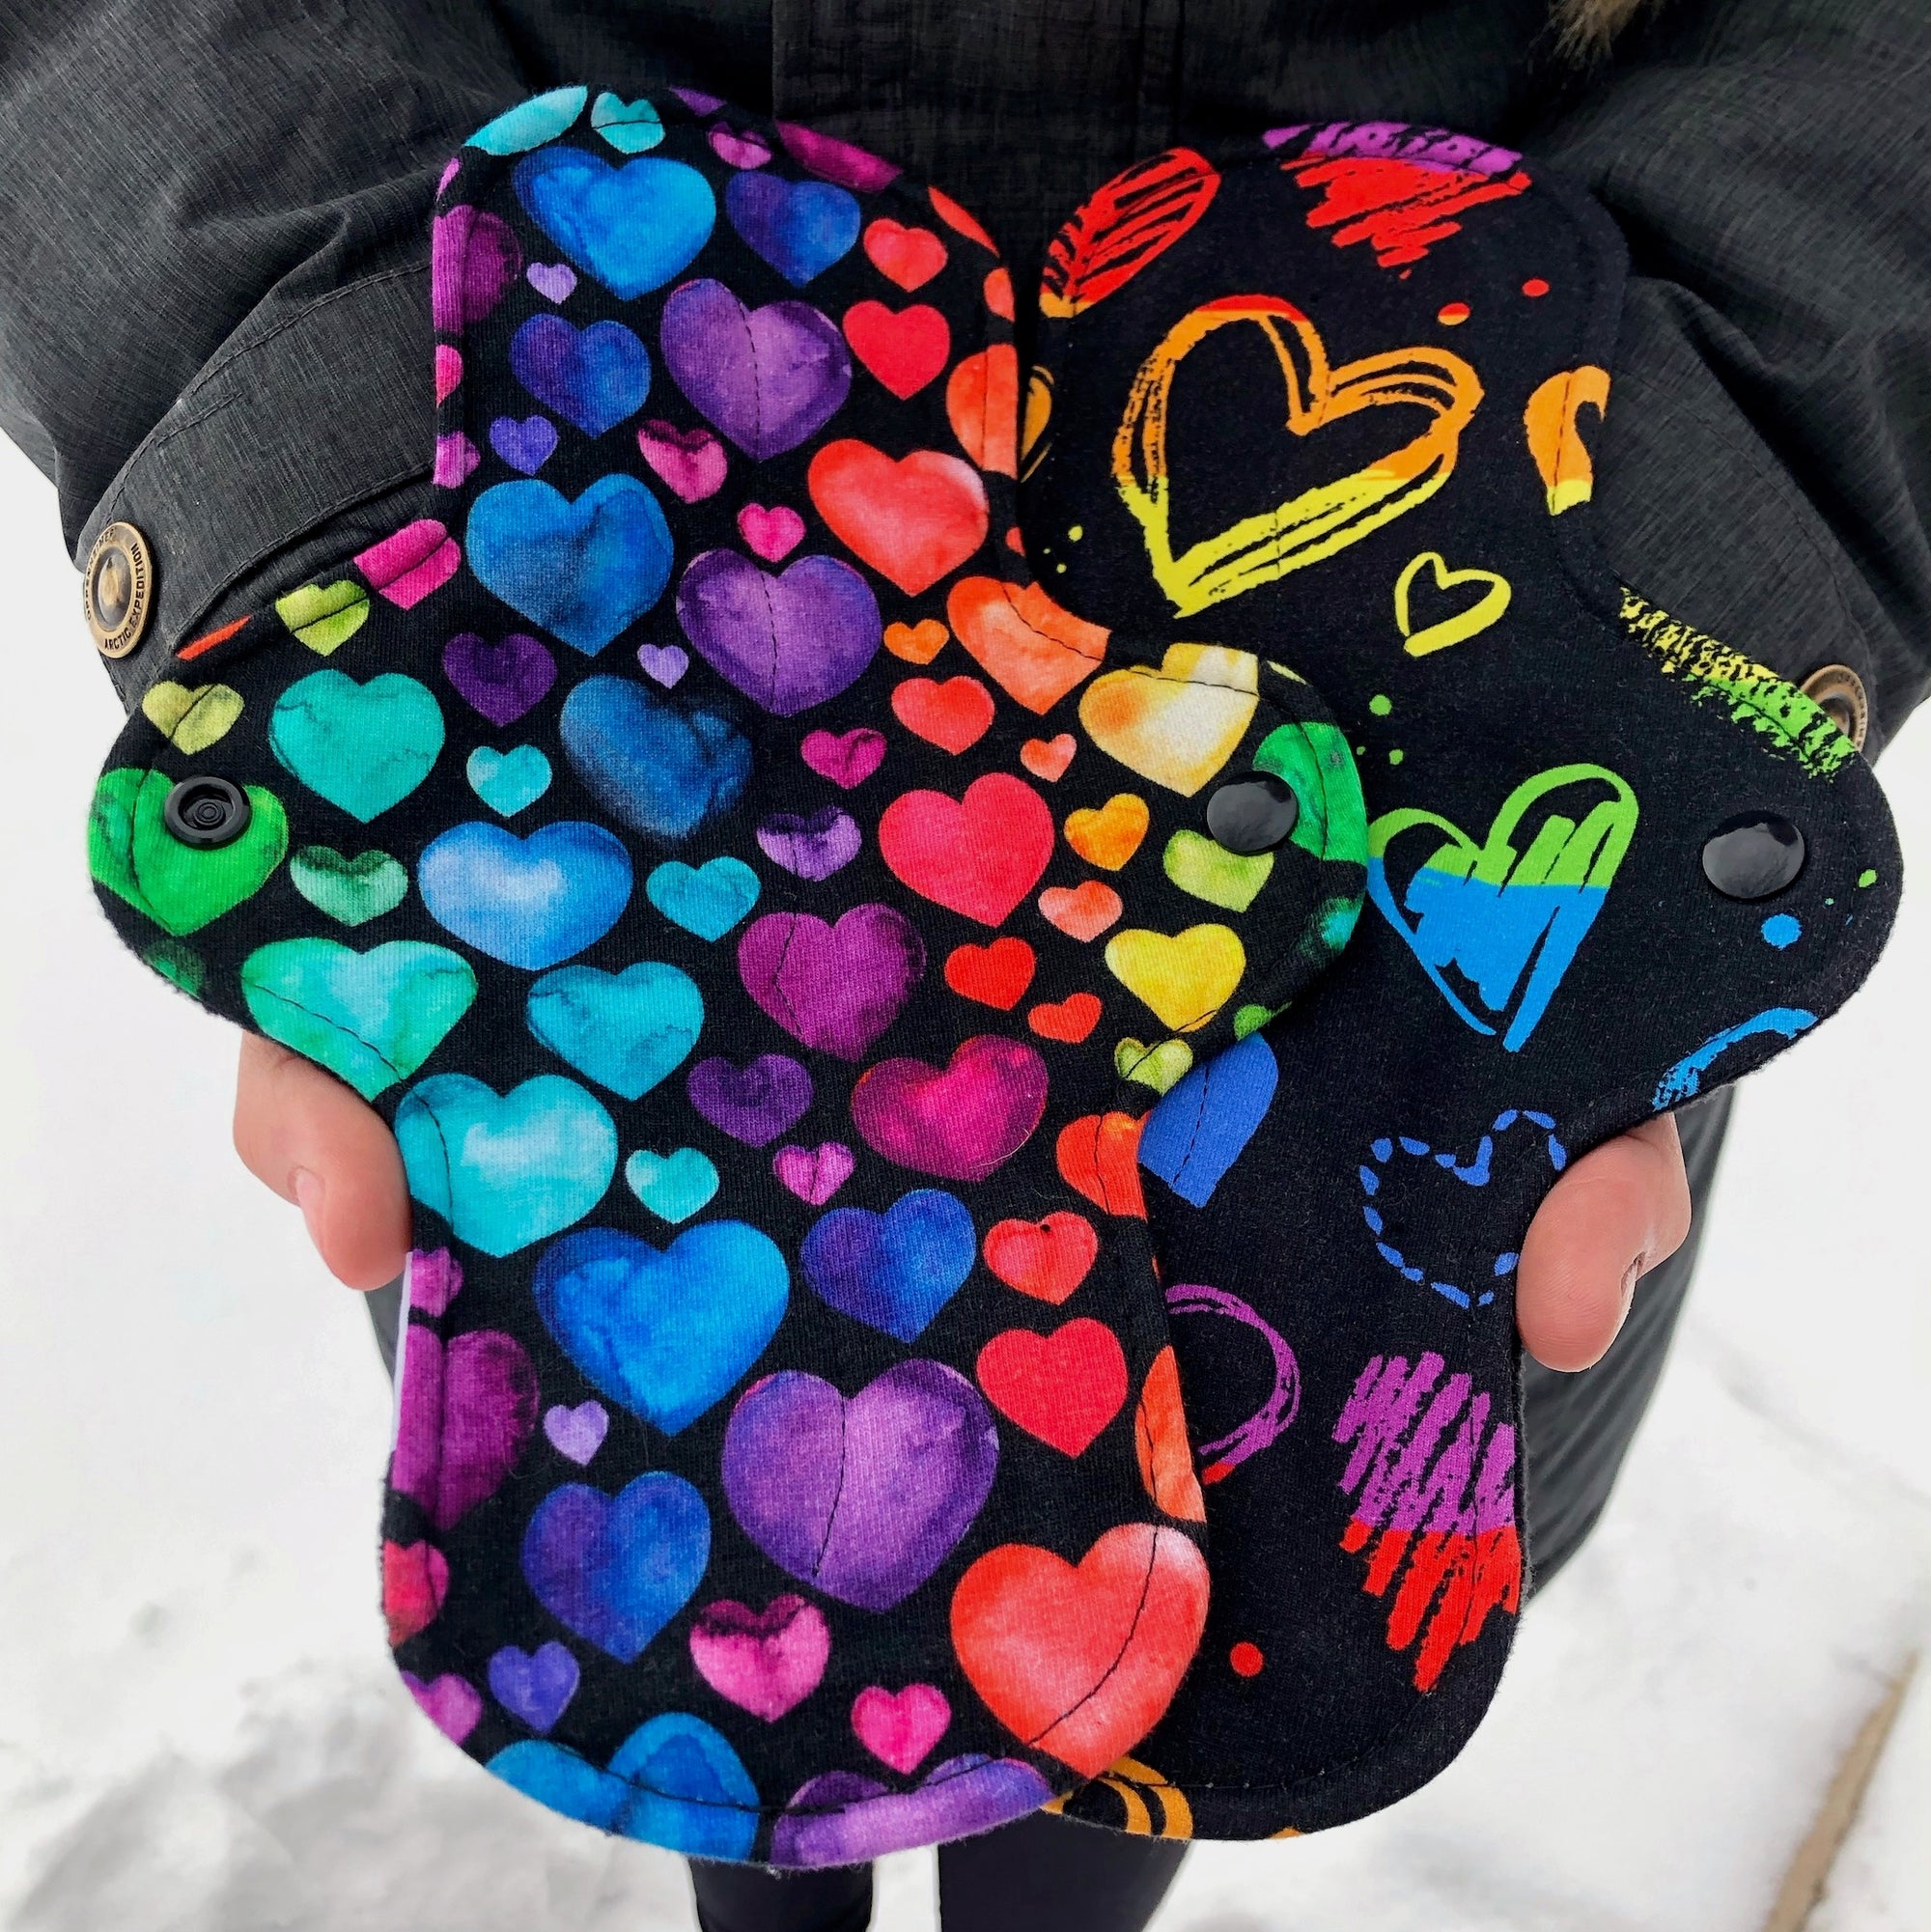 two brightly coloured reusable pads held in outstretched hands